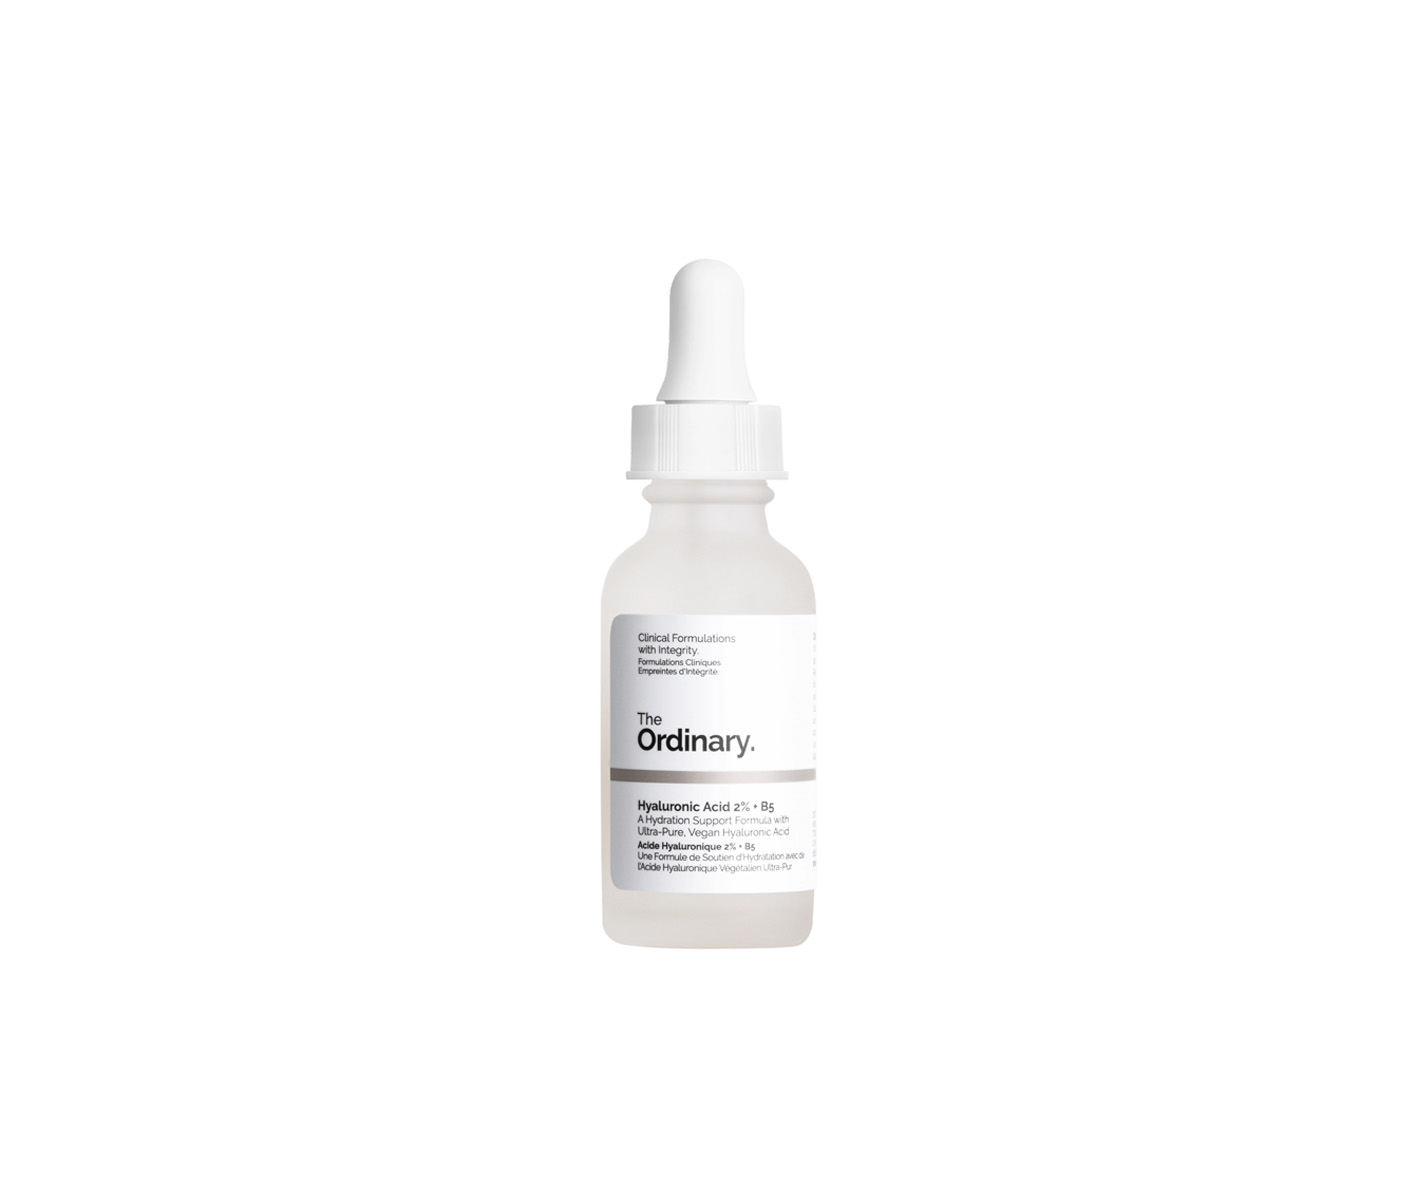 The Ordinary, Hydrating Serum with Hyaluronic Acid & Vitamin B5